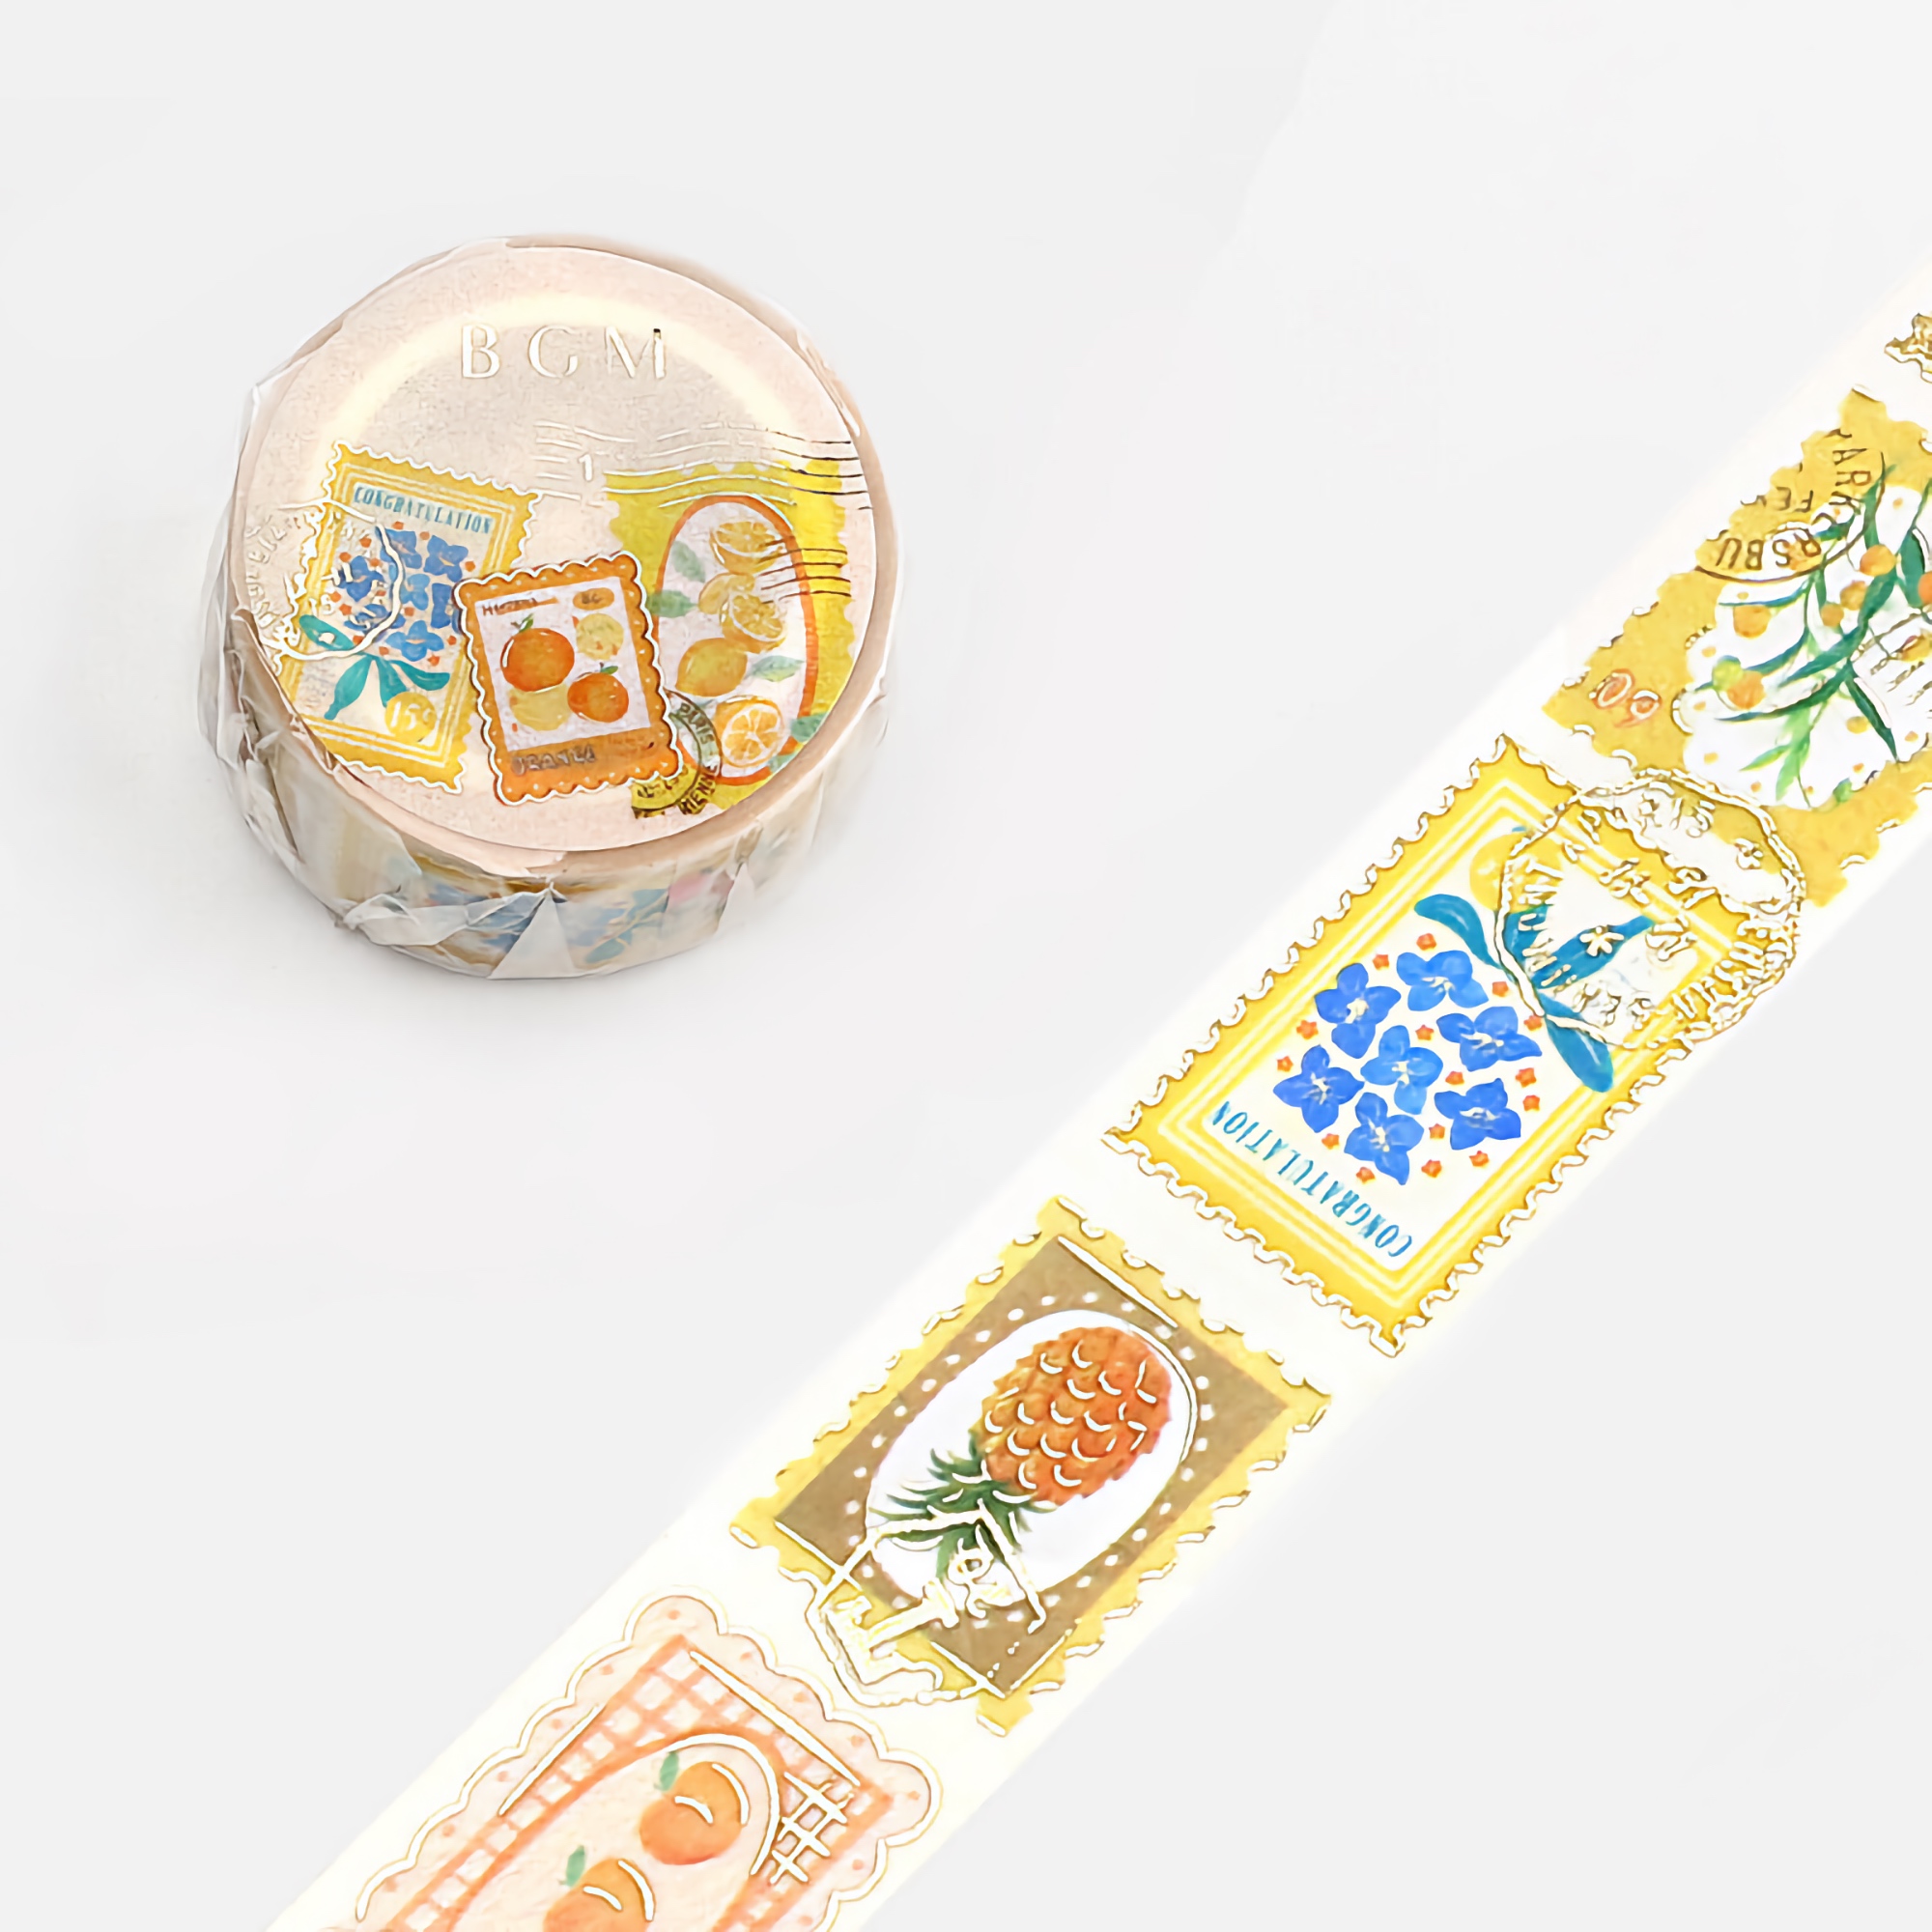 BGM Washi Tape Gold Foil Postage Stamp Yellow Plants 20 mm